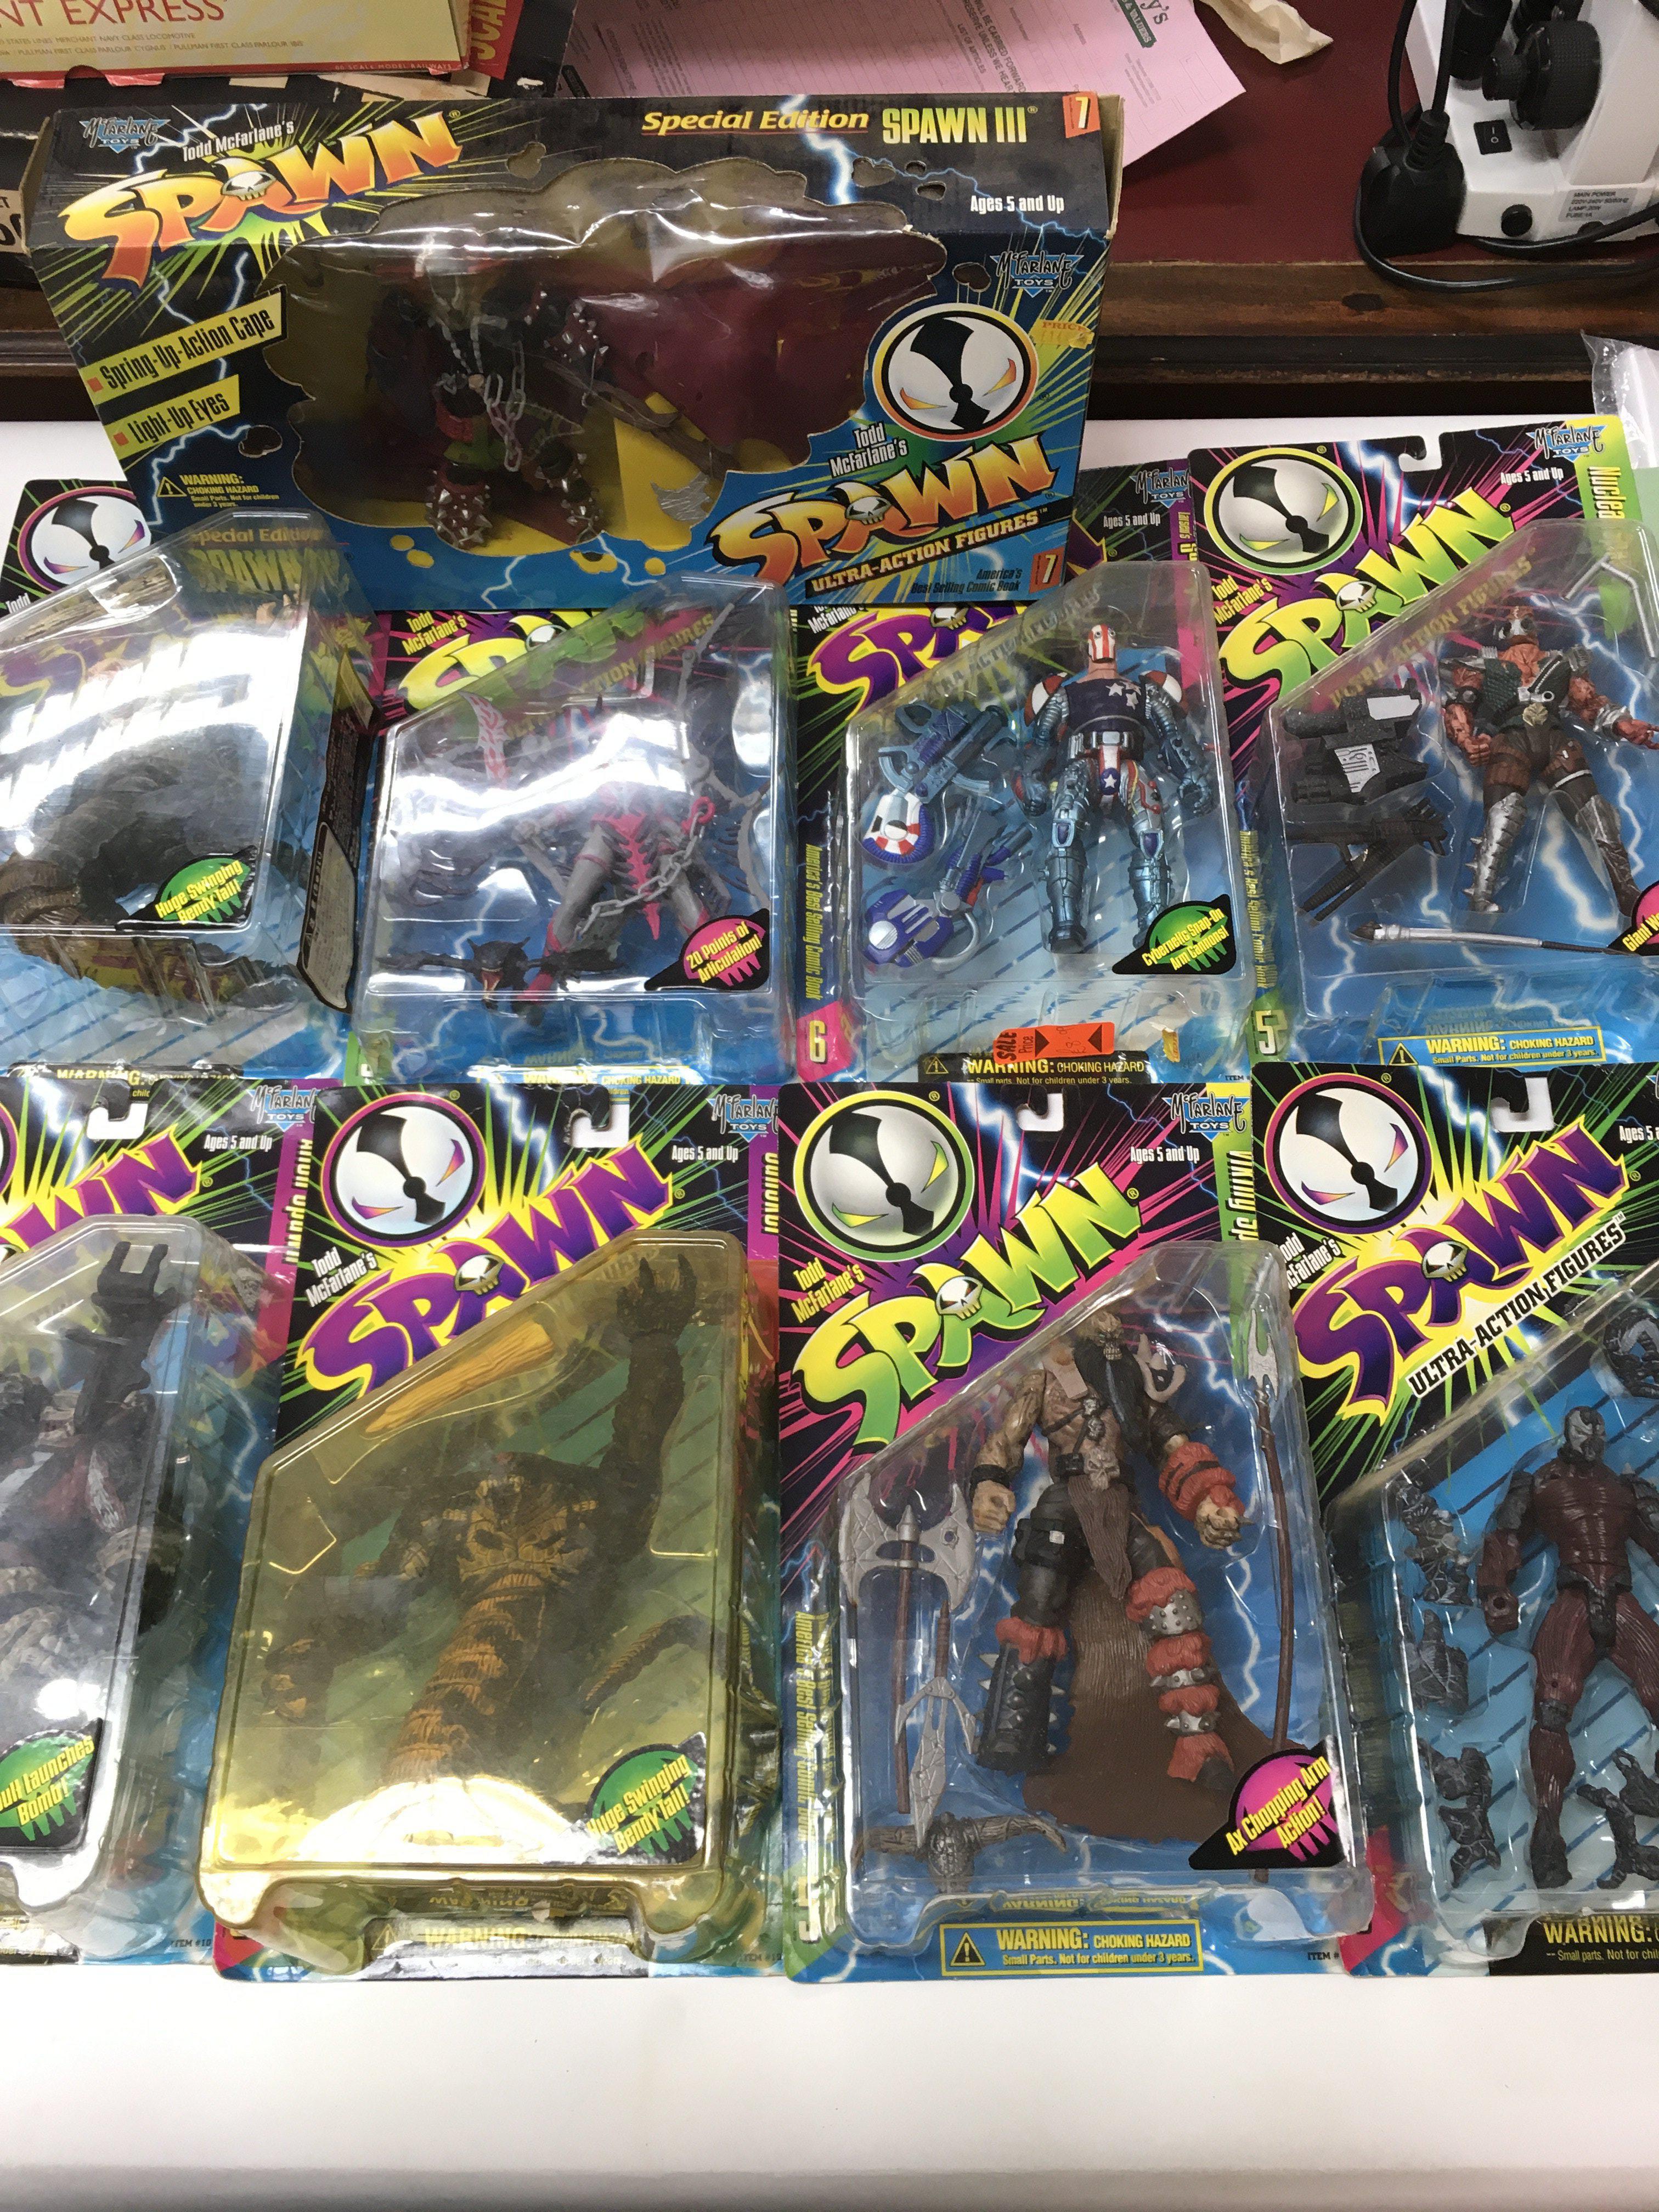 A Collection of Mcfalane Spawn Figures All Carded.